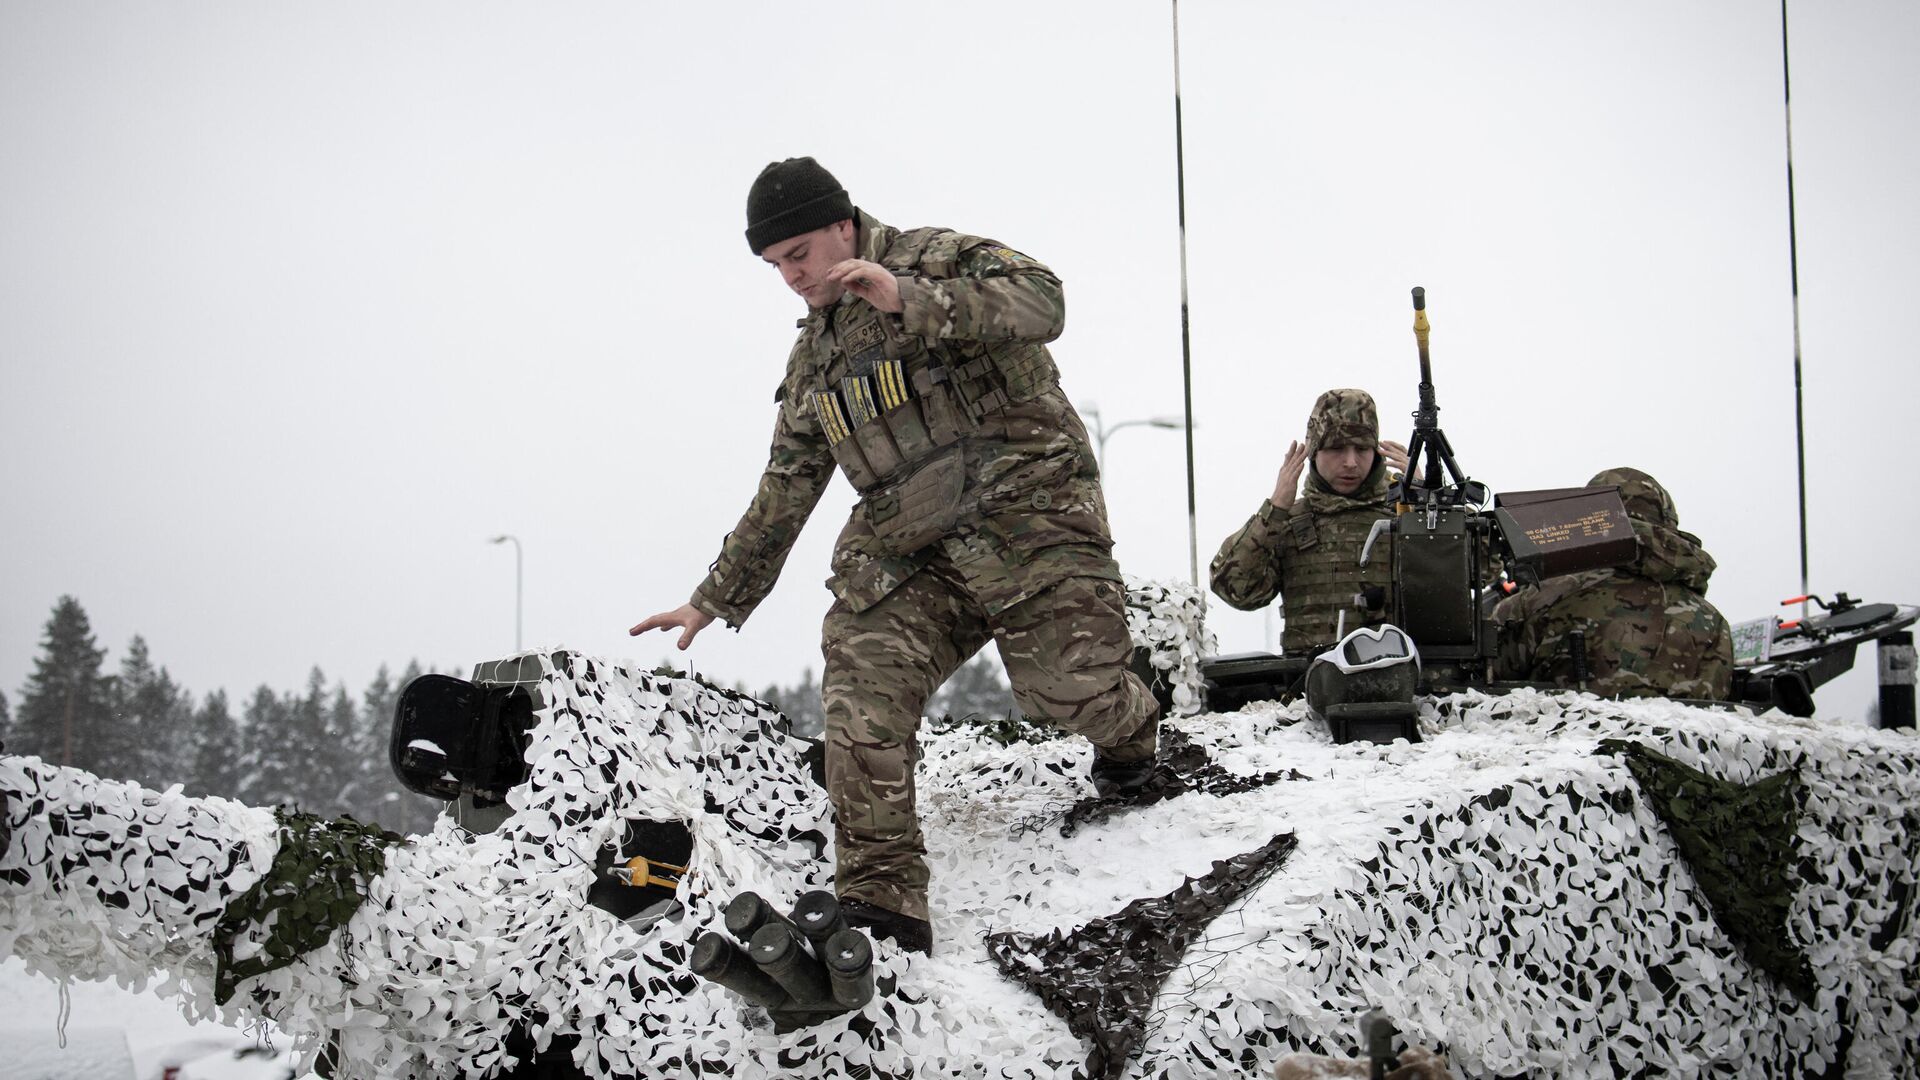 British soldiers take part in a major drill as part of NATO's enhanced forward presence (EFP) deployment in Poland and the Baltic nations of Estonia, Latvia and Lithuania, at the Tapa estonian army camp near Rakvere on February 5, 2022 - Sputnik International, 1920, 09.03.2022